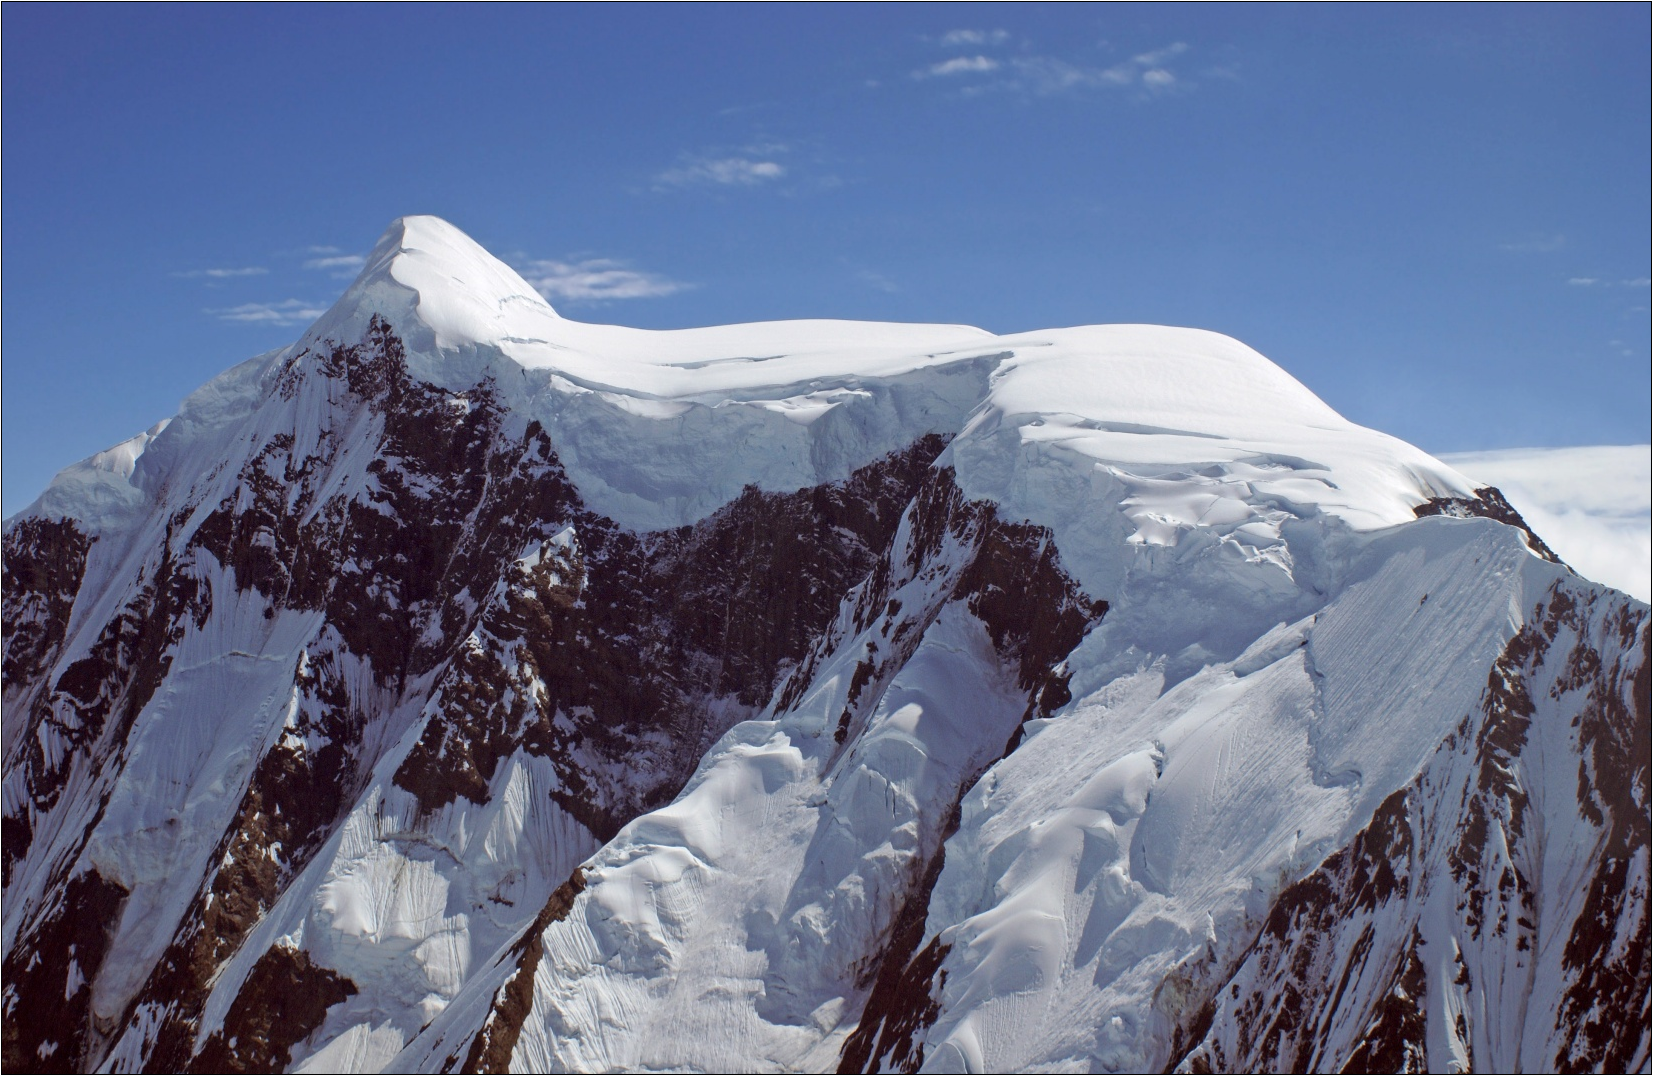 Snowy mountain peaks with blue sky in the background